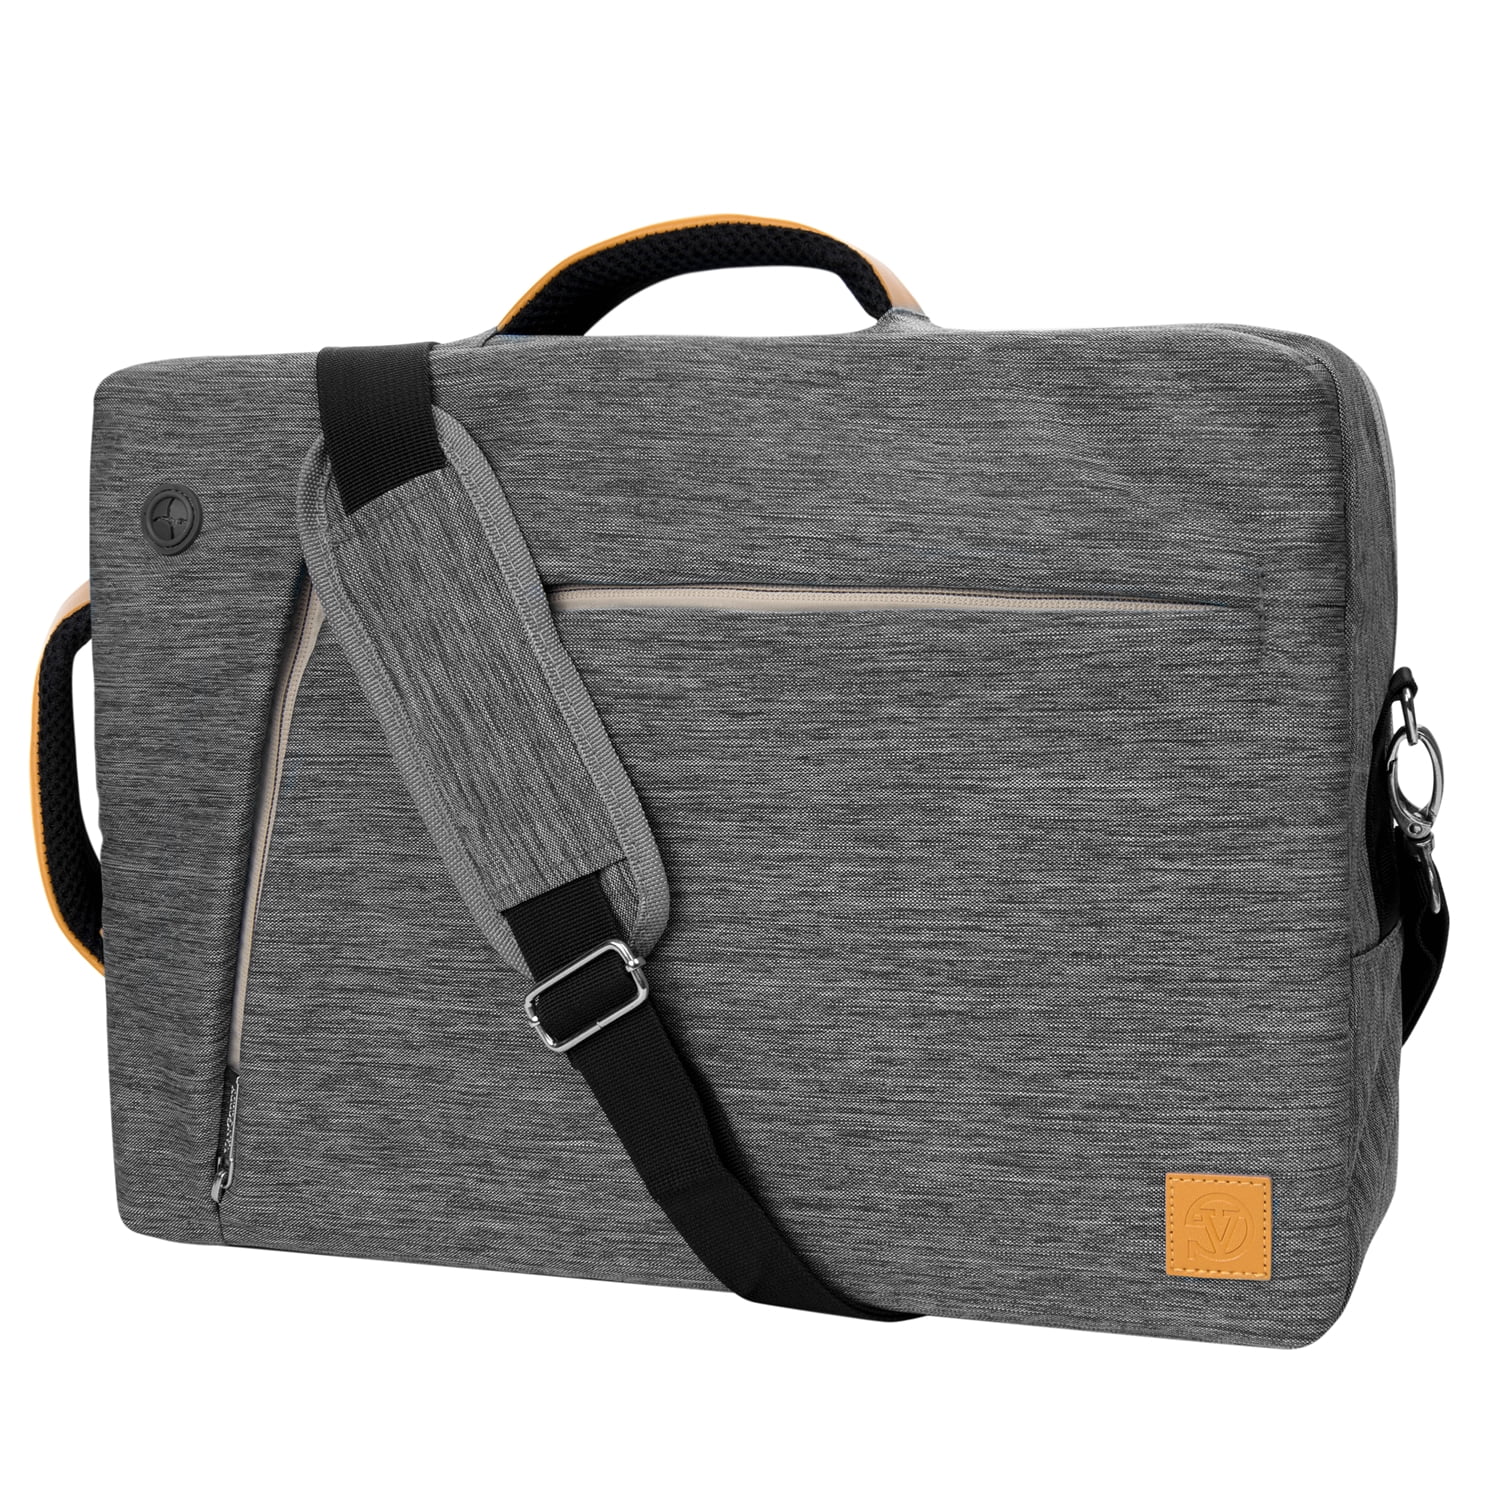 14 Inch Handmade Wool Flet Sleeve Case Bag Ultrabook Laptop Carrying Bag with Black Elastic Band for Dell Alienware M14 Sleeve Case Cover Light Grey